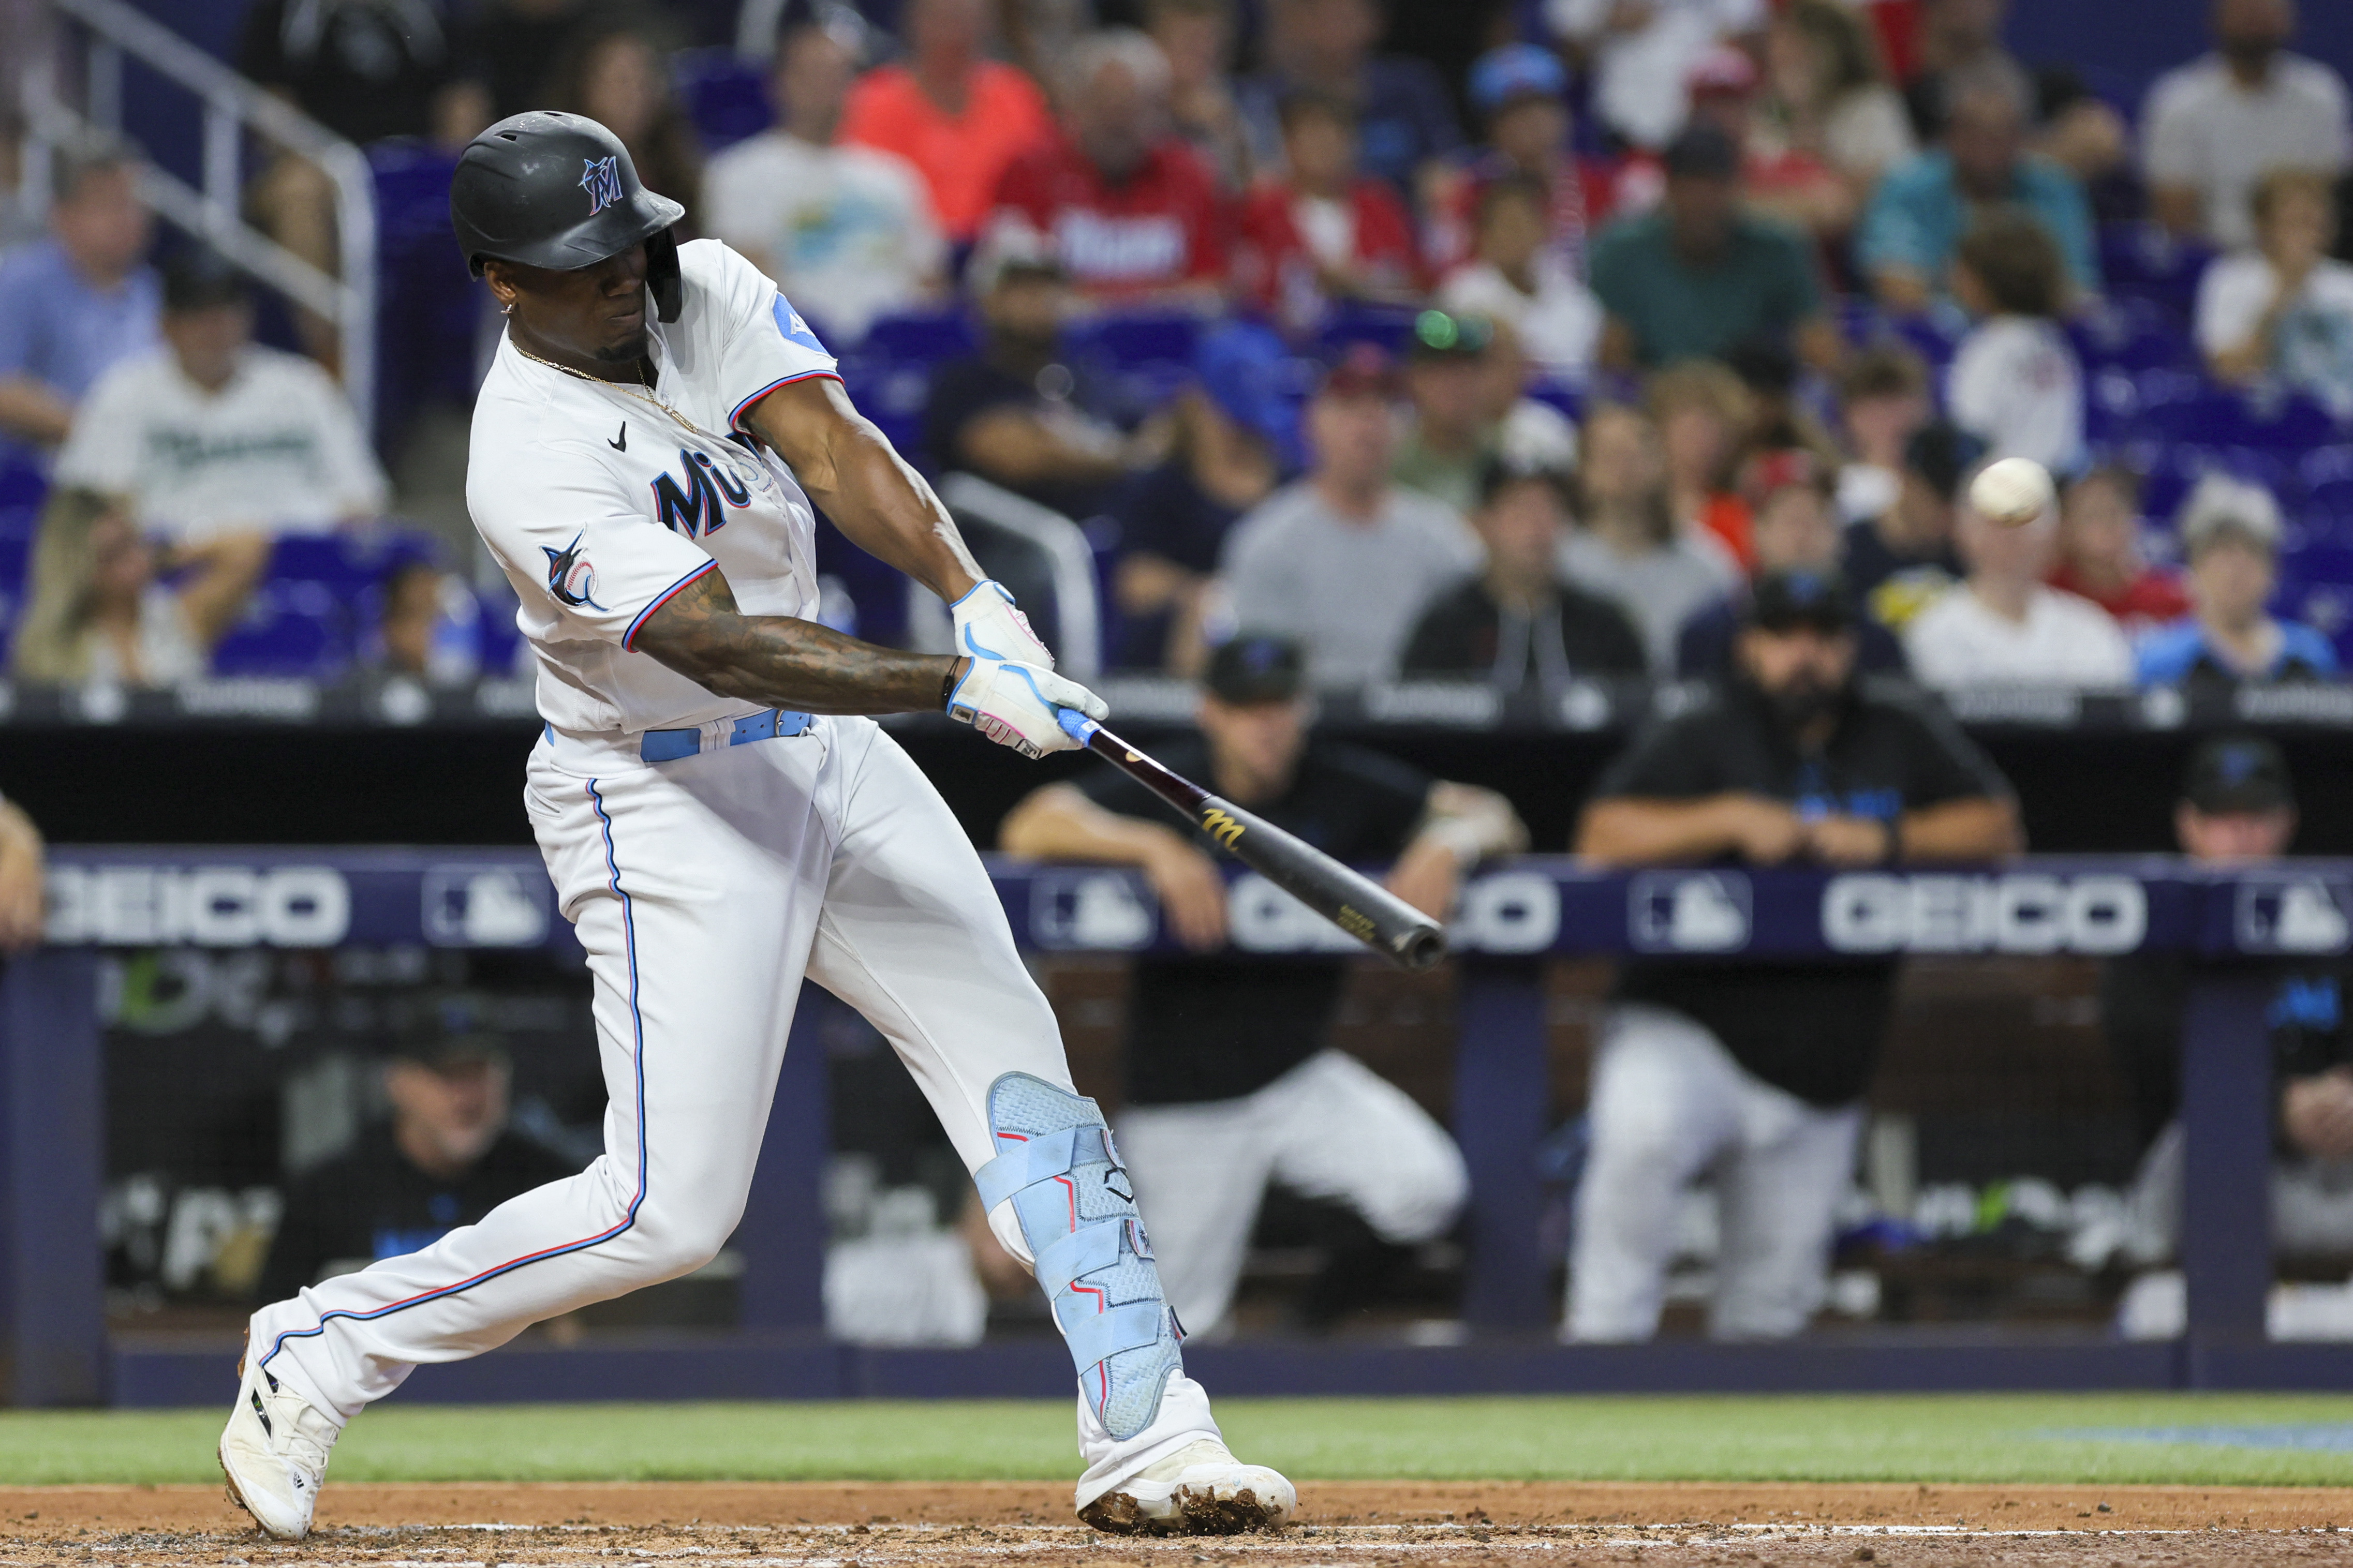 Bally Sports Florida: Marlins on X: Jorge Soler homered and made two great  plays in RF for the Marlins in tonight's win! He speaks with @KellySaco  postgame 👇 @Marlins